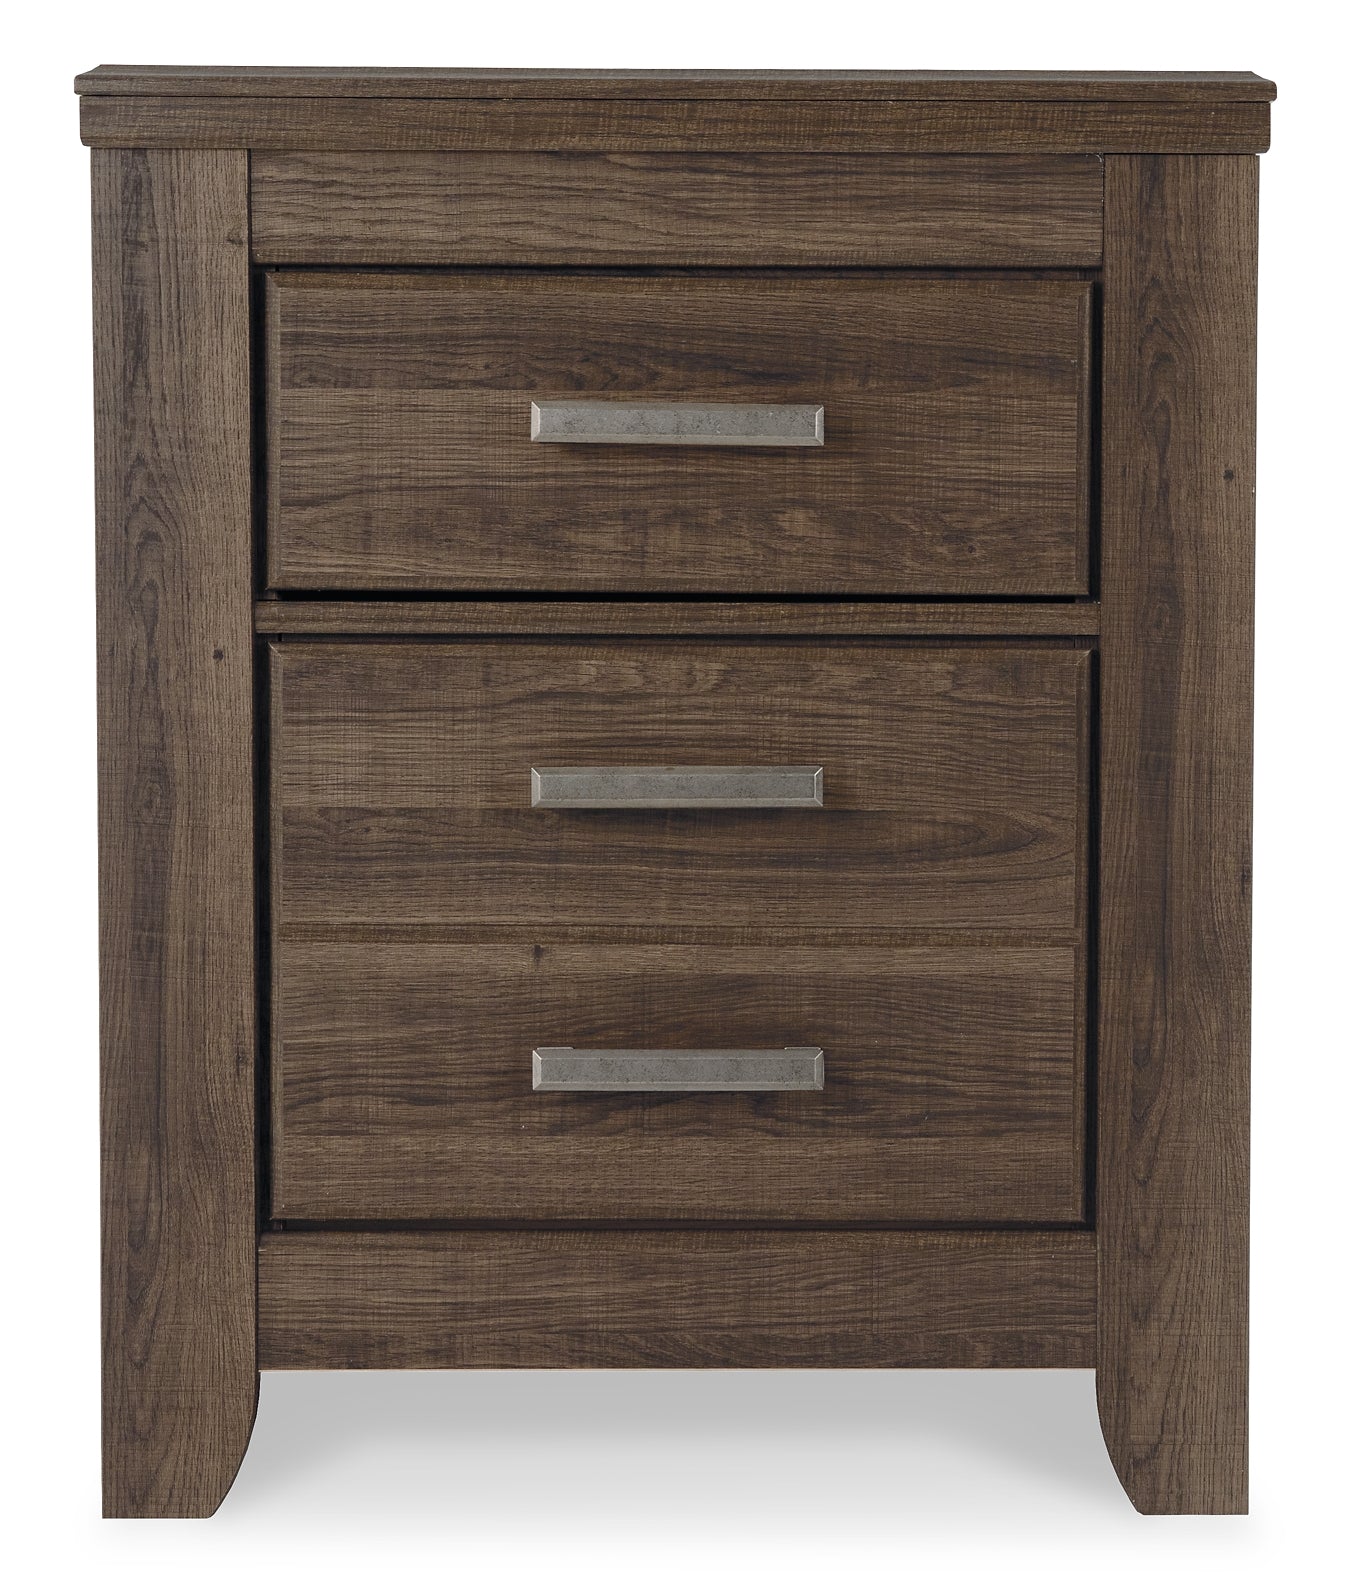 Juararo California King Panel Bed with Mirrored Dresser, Chest and Nightstand Rent Wise Rent To Own Jacksonville, Florida